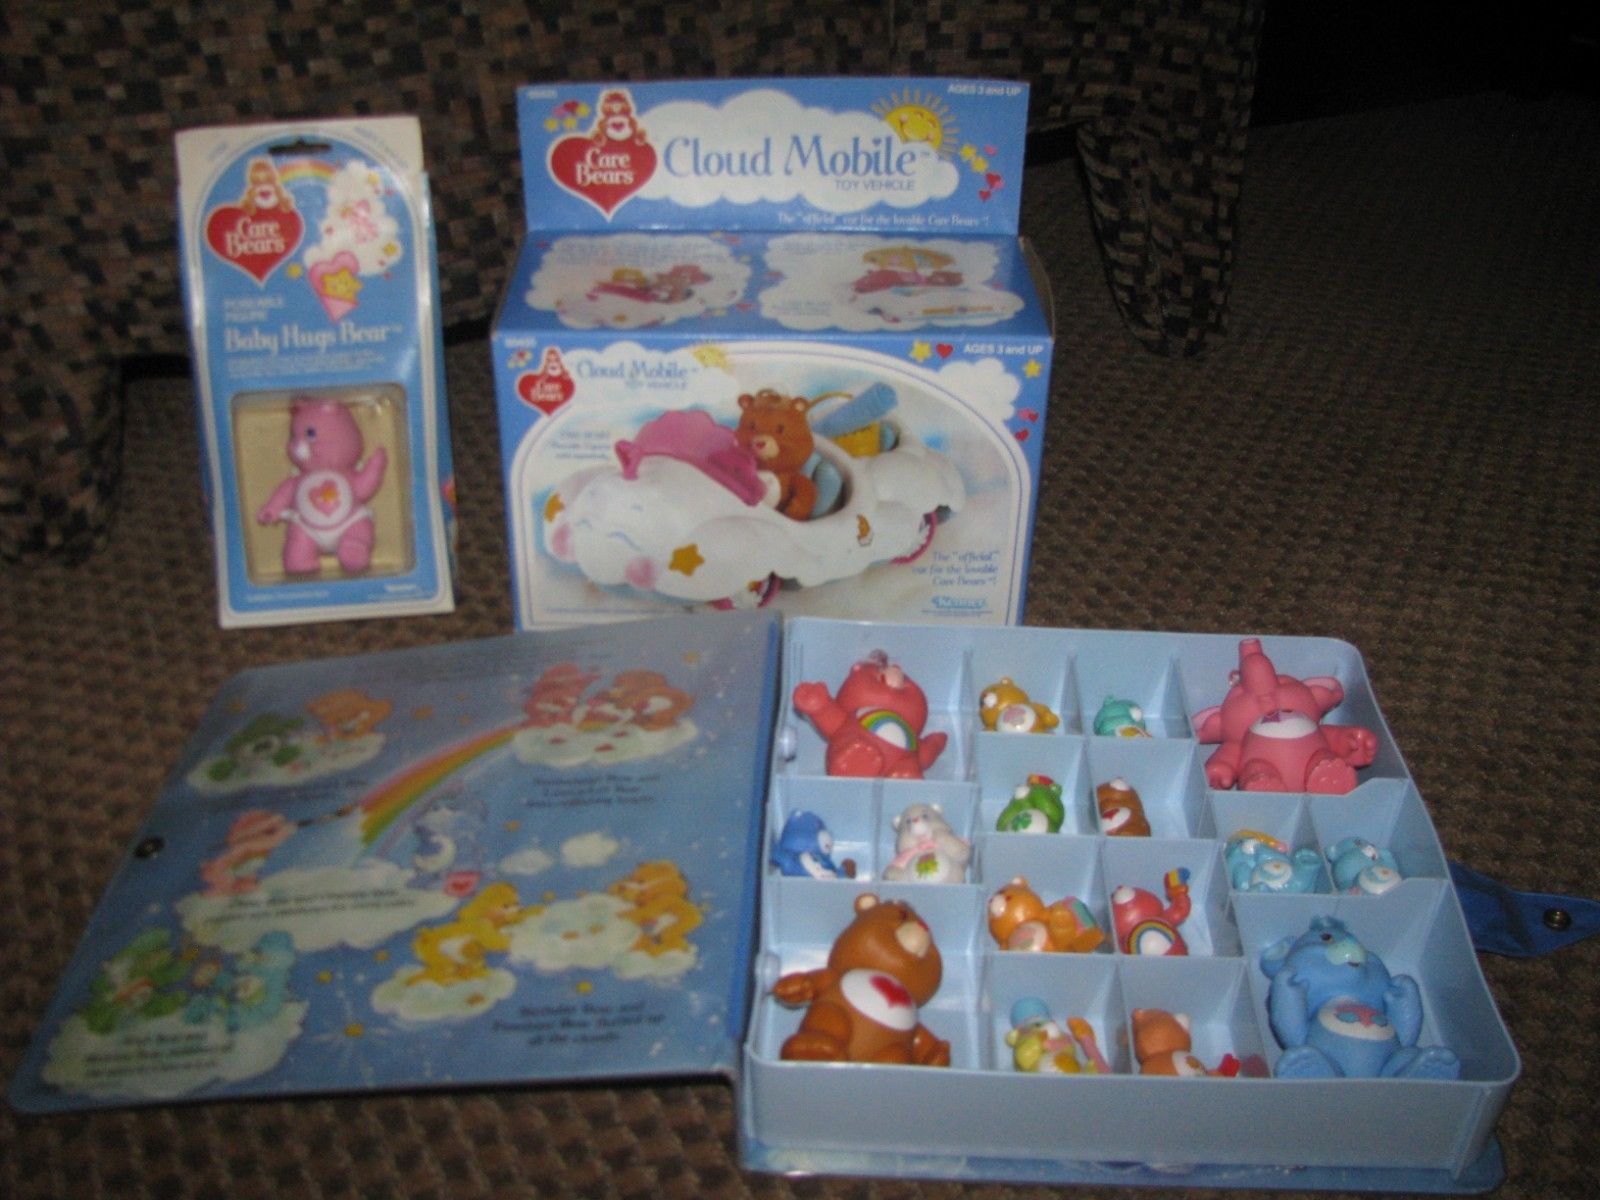 VINTAGE CARE BEARS CLOUD MOBILE NEW N BOX CARRY CASE W/16 FIGURE & BABY HUGS BOX